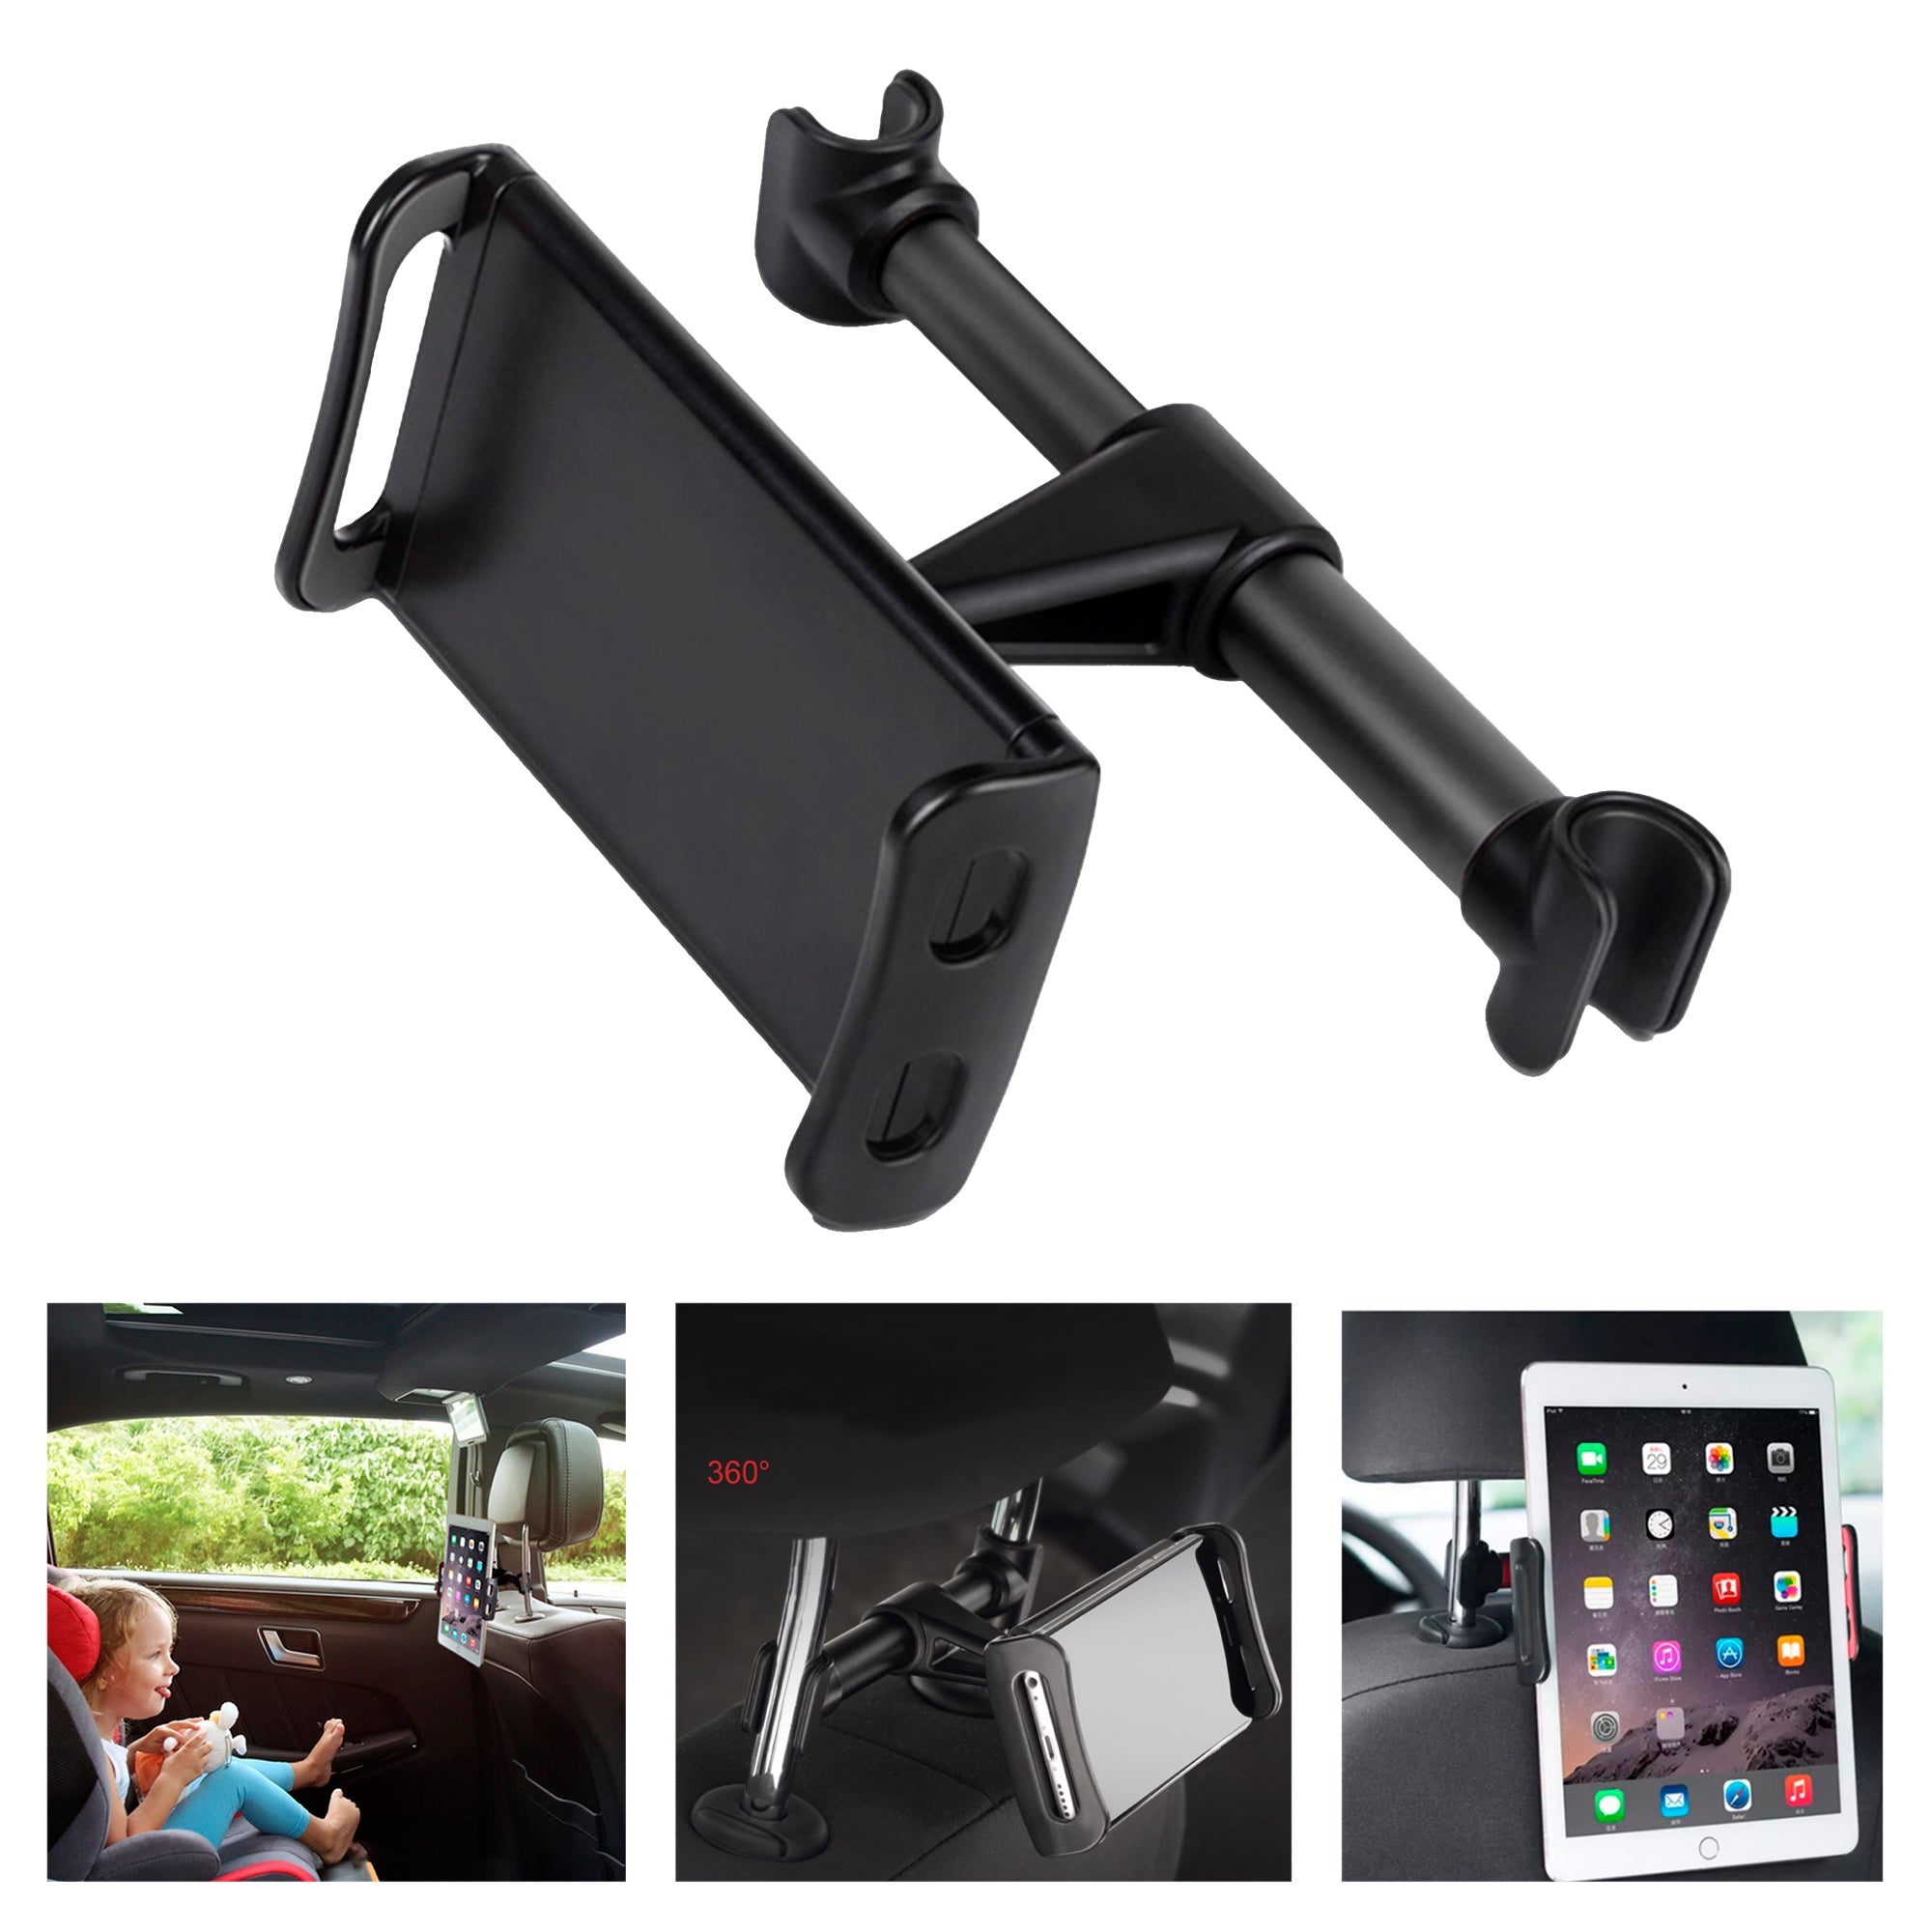 Hold - Supporto smartphone/Tablet auto - BRICO EXPRESS